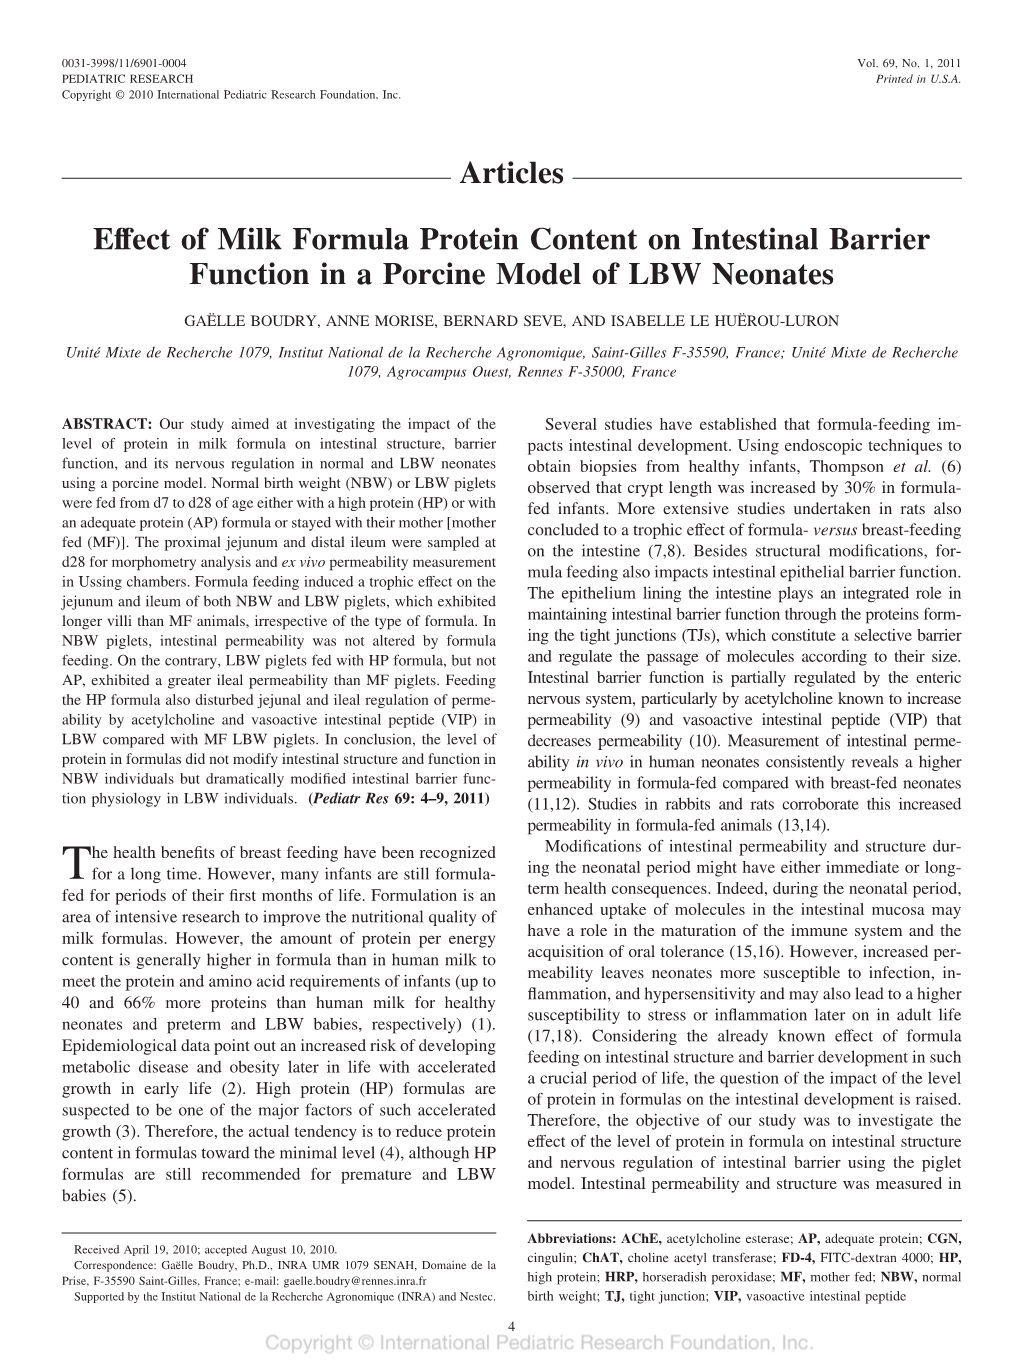 Articles Effect of Milk Formula Protein Content on Intestinal Barrier